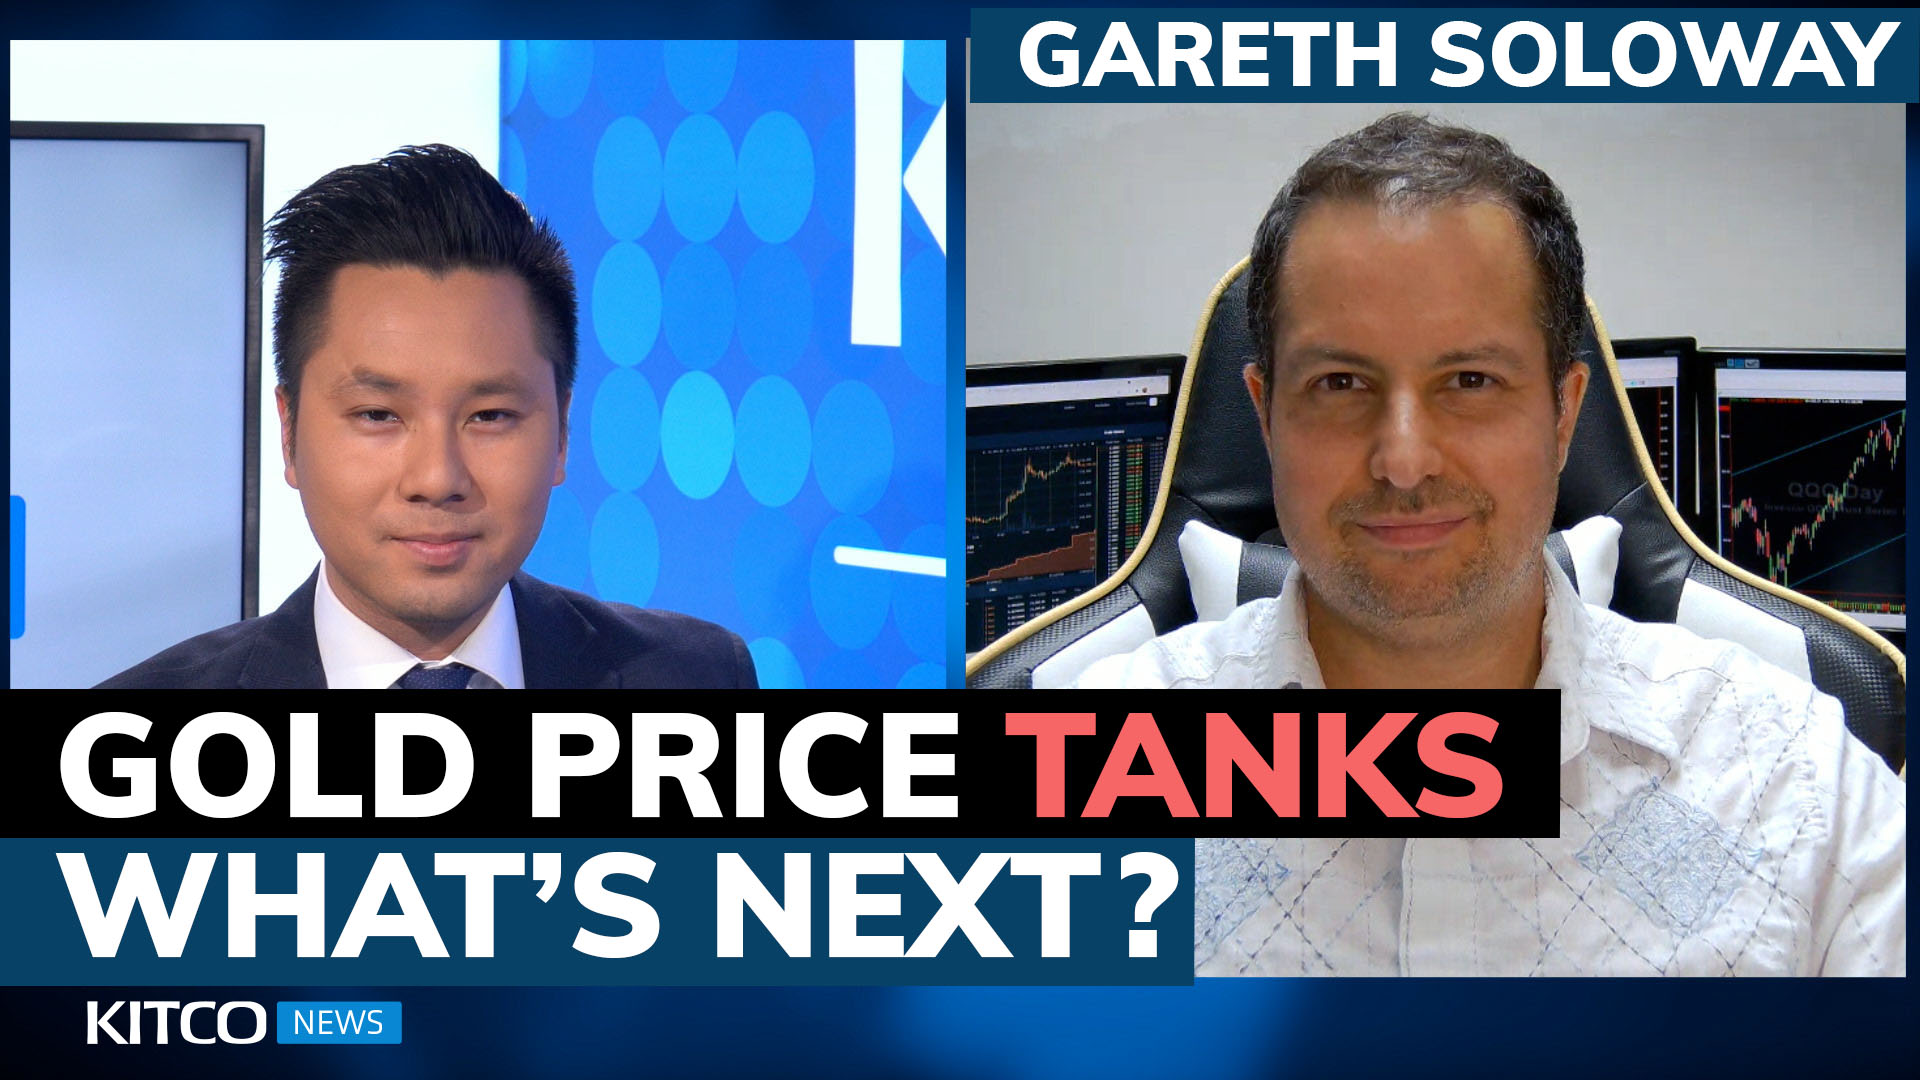 Why did gold price drop 2% today? More downside coming? Gareth Soloway on metals, stocks …